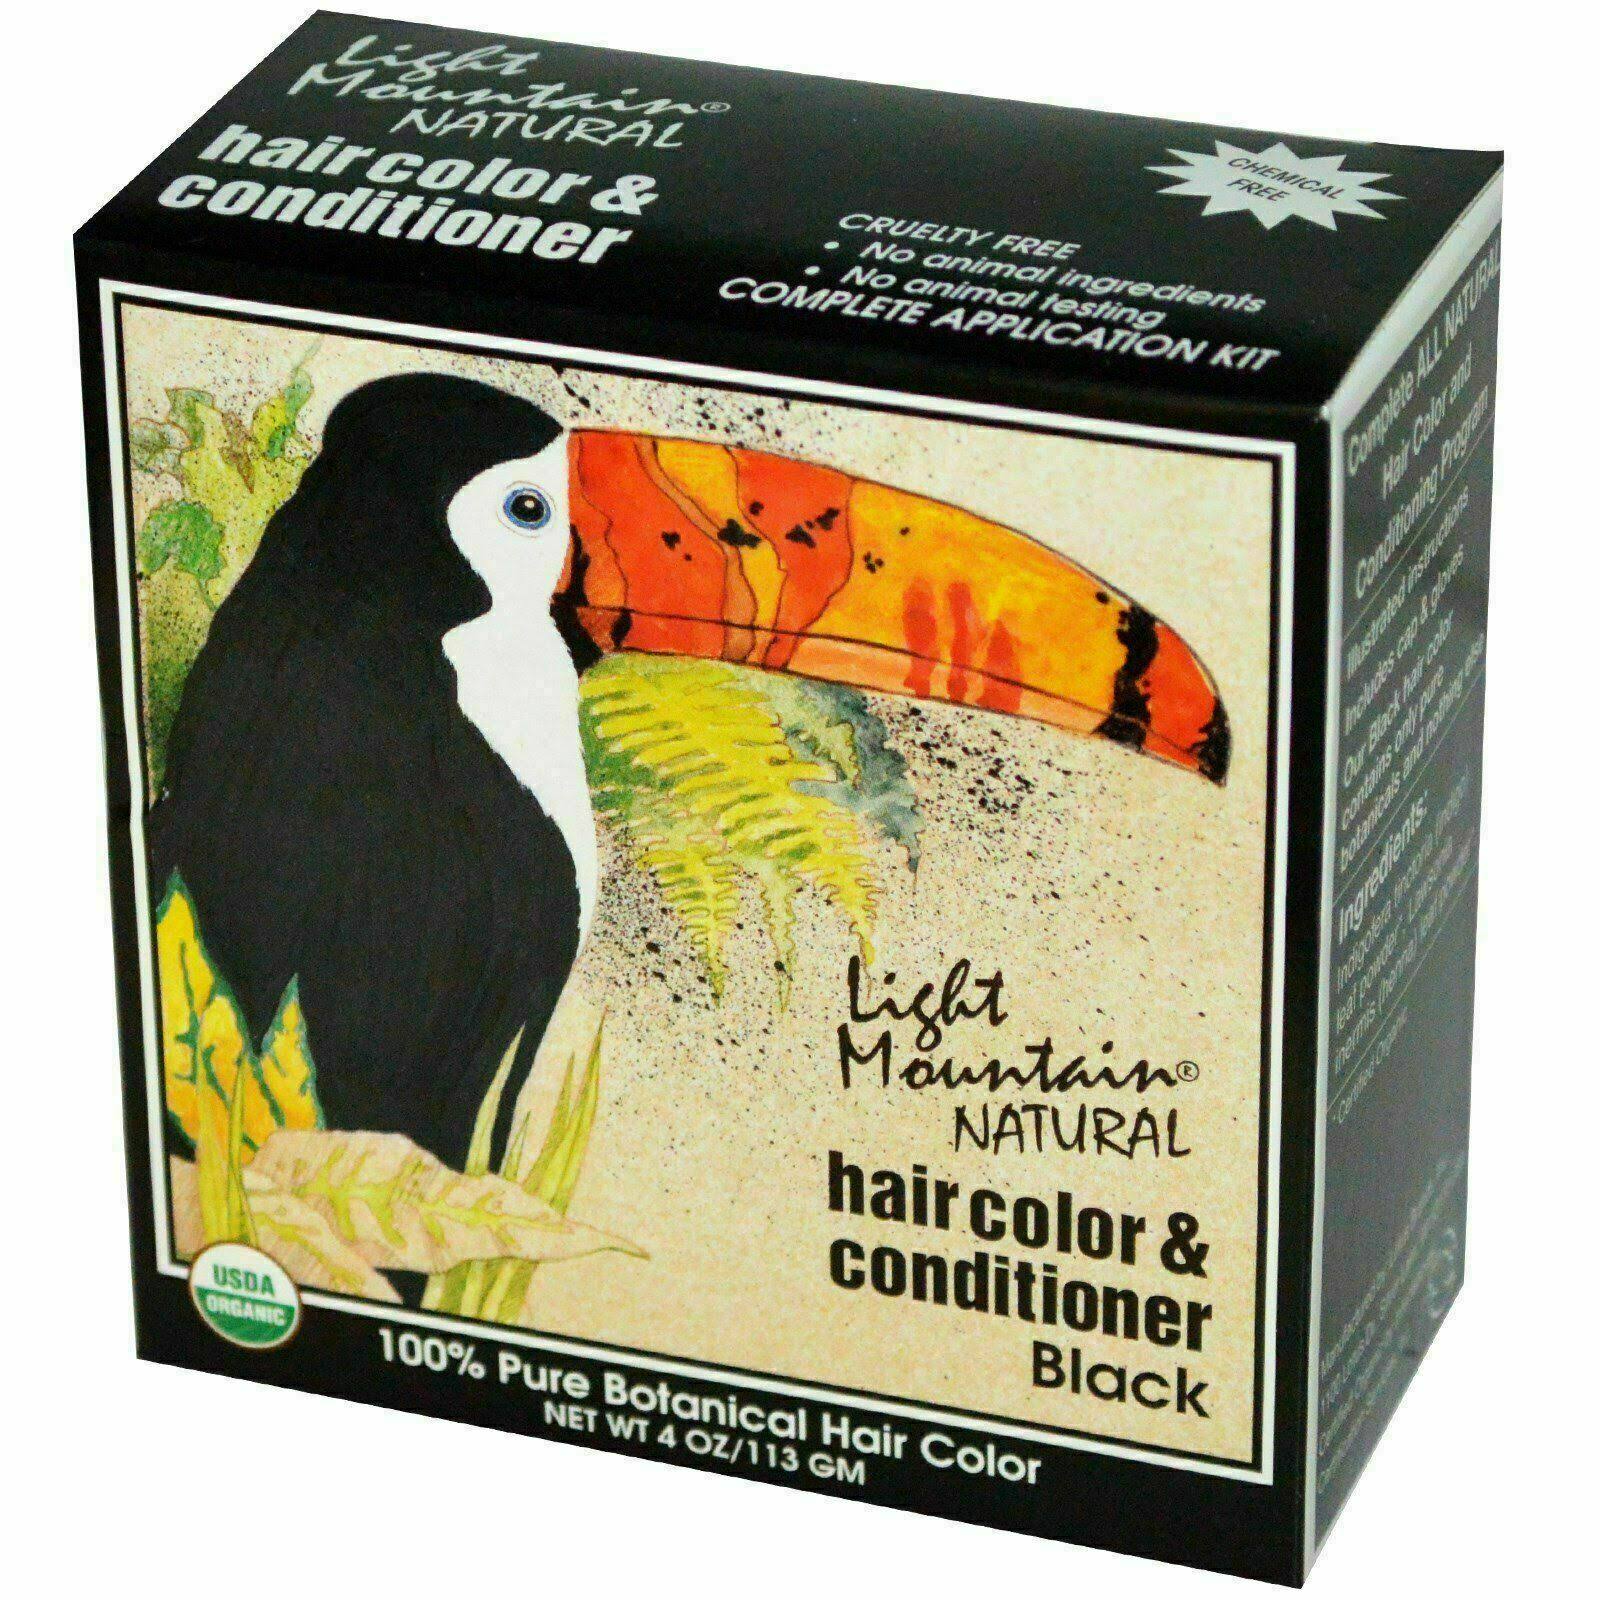 Light Mountain Hair Color and Conditioner - Black, 4oz